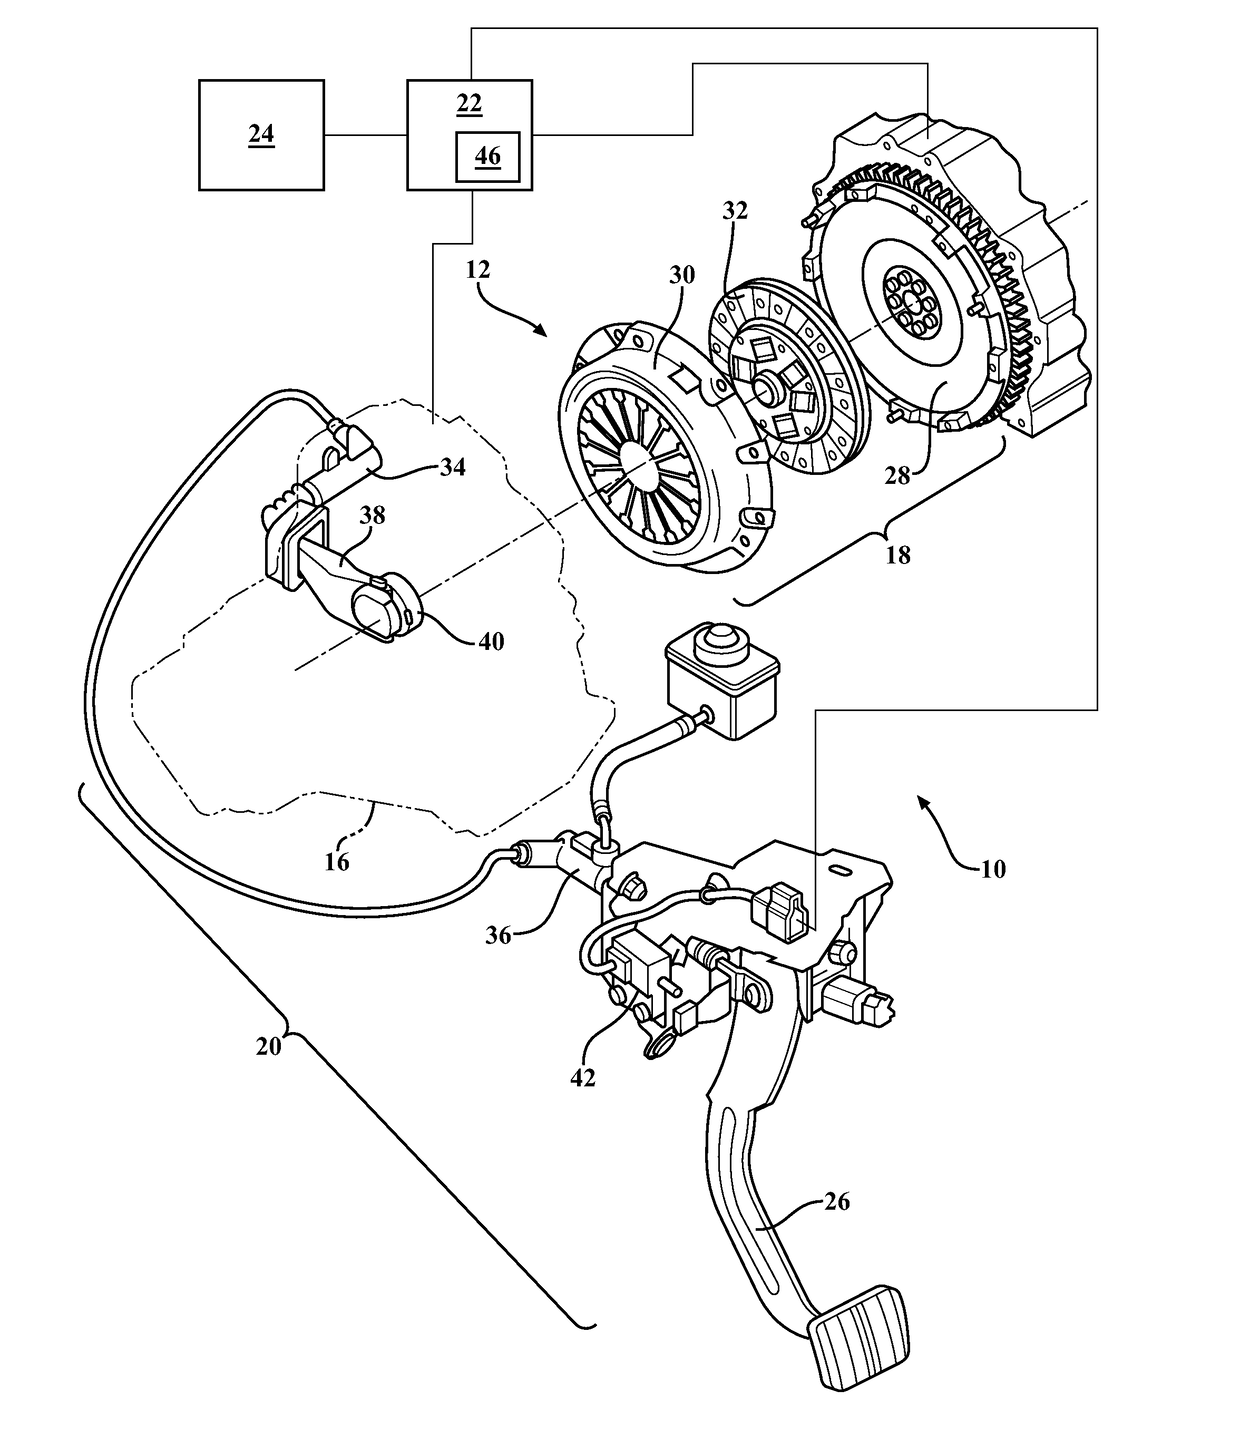 Control system for manual transmissions